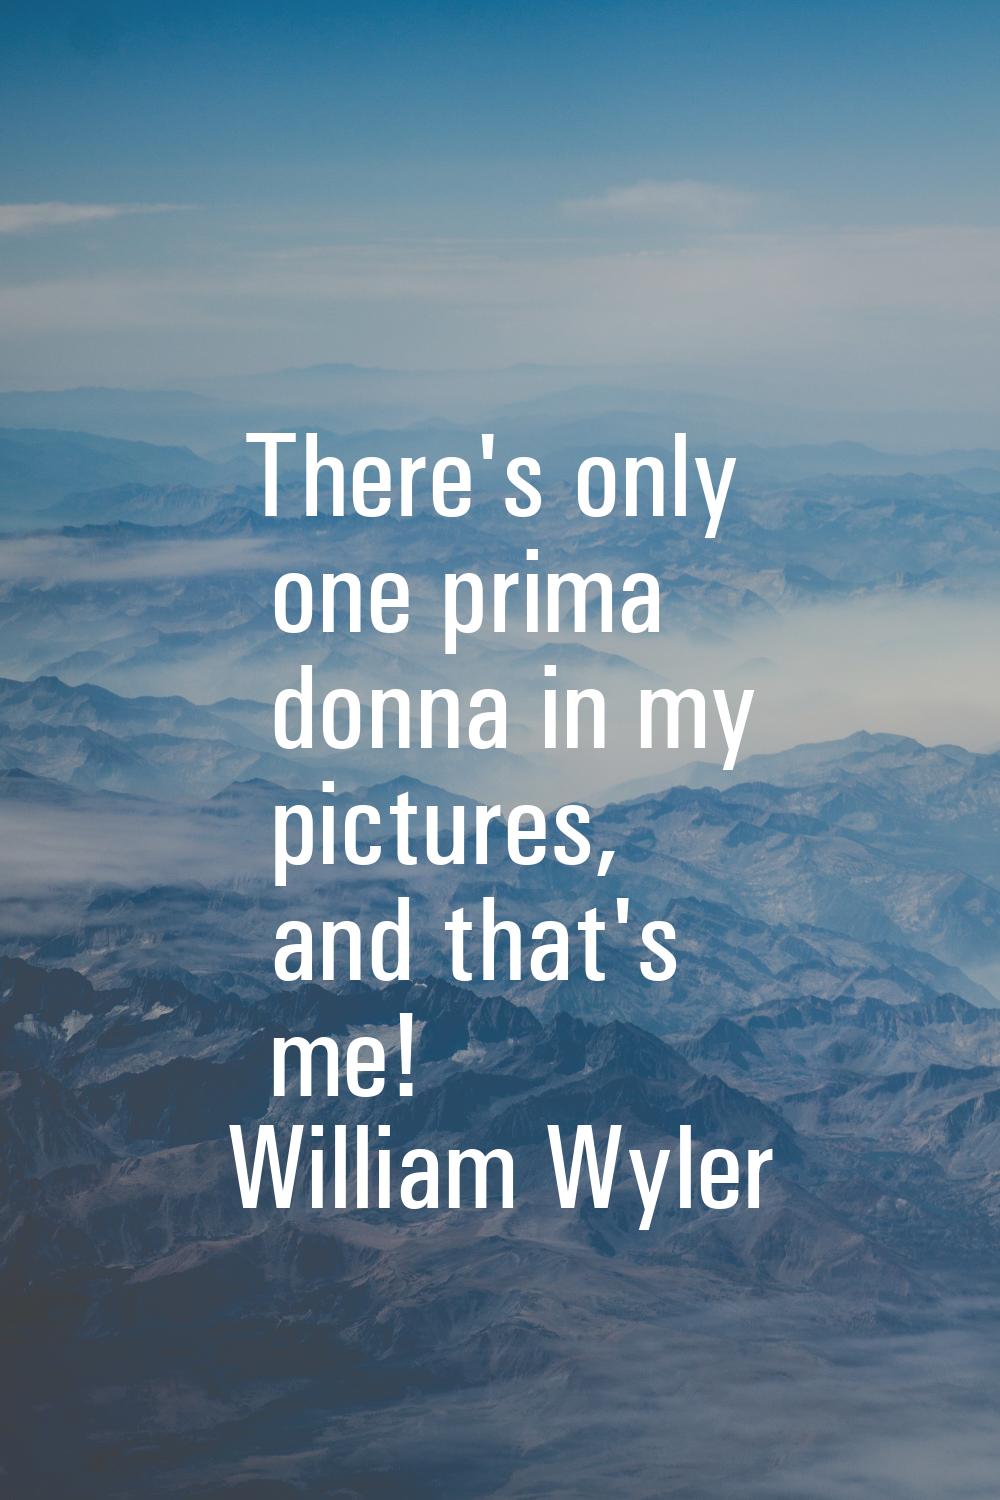 There's only one prima donna in my pictures, and that's me!